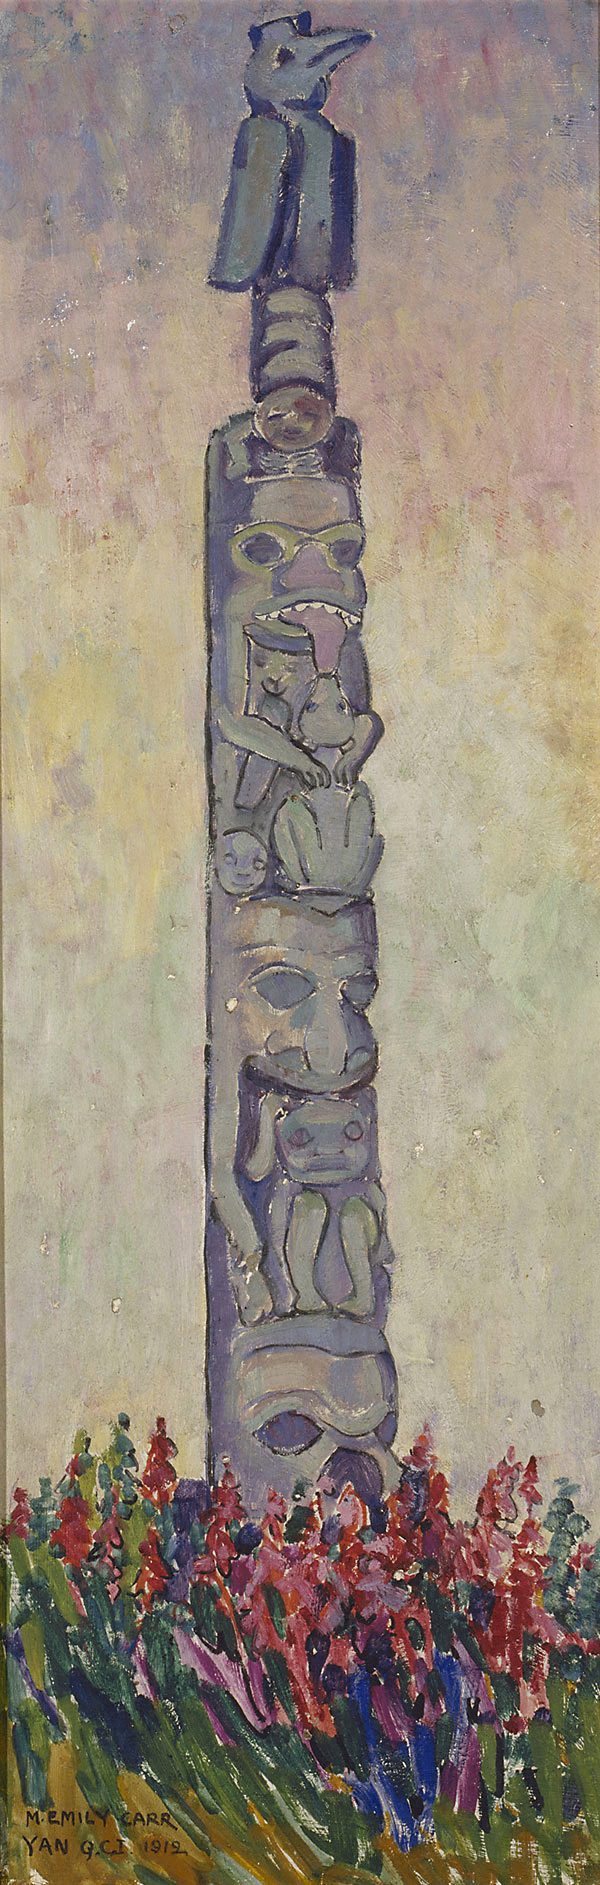 Indian Totem pole, Yan, Queen Charlotte Islands, Emily Carr